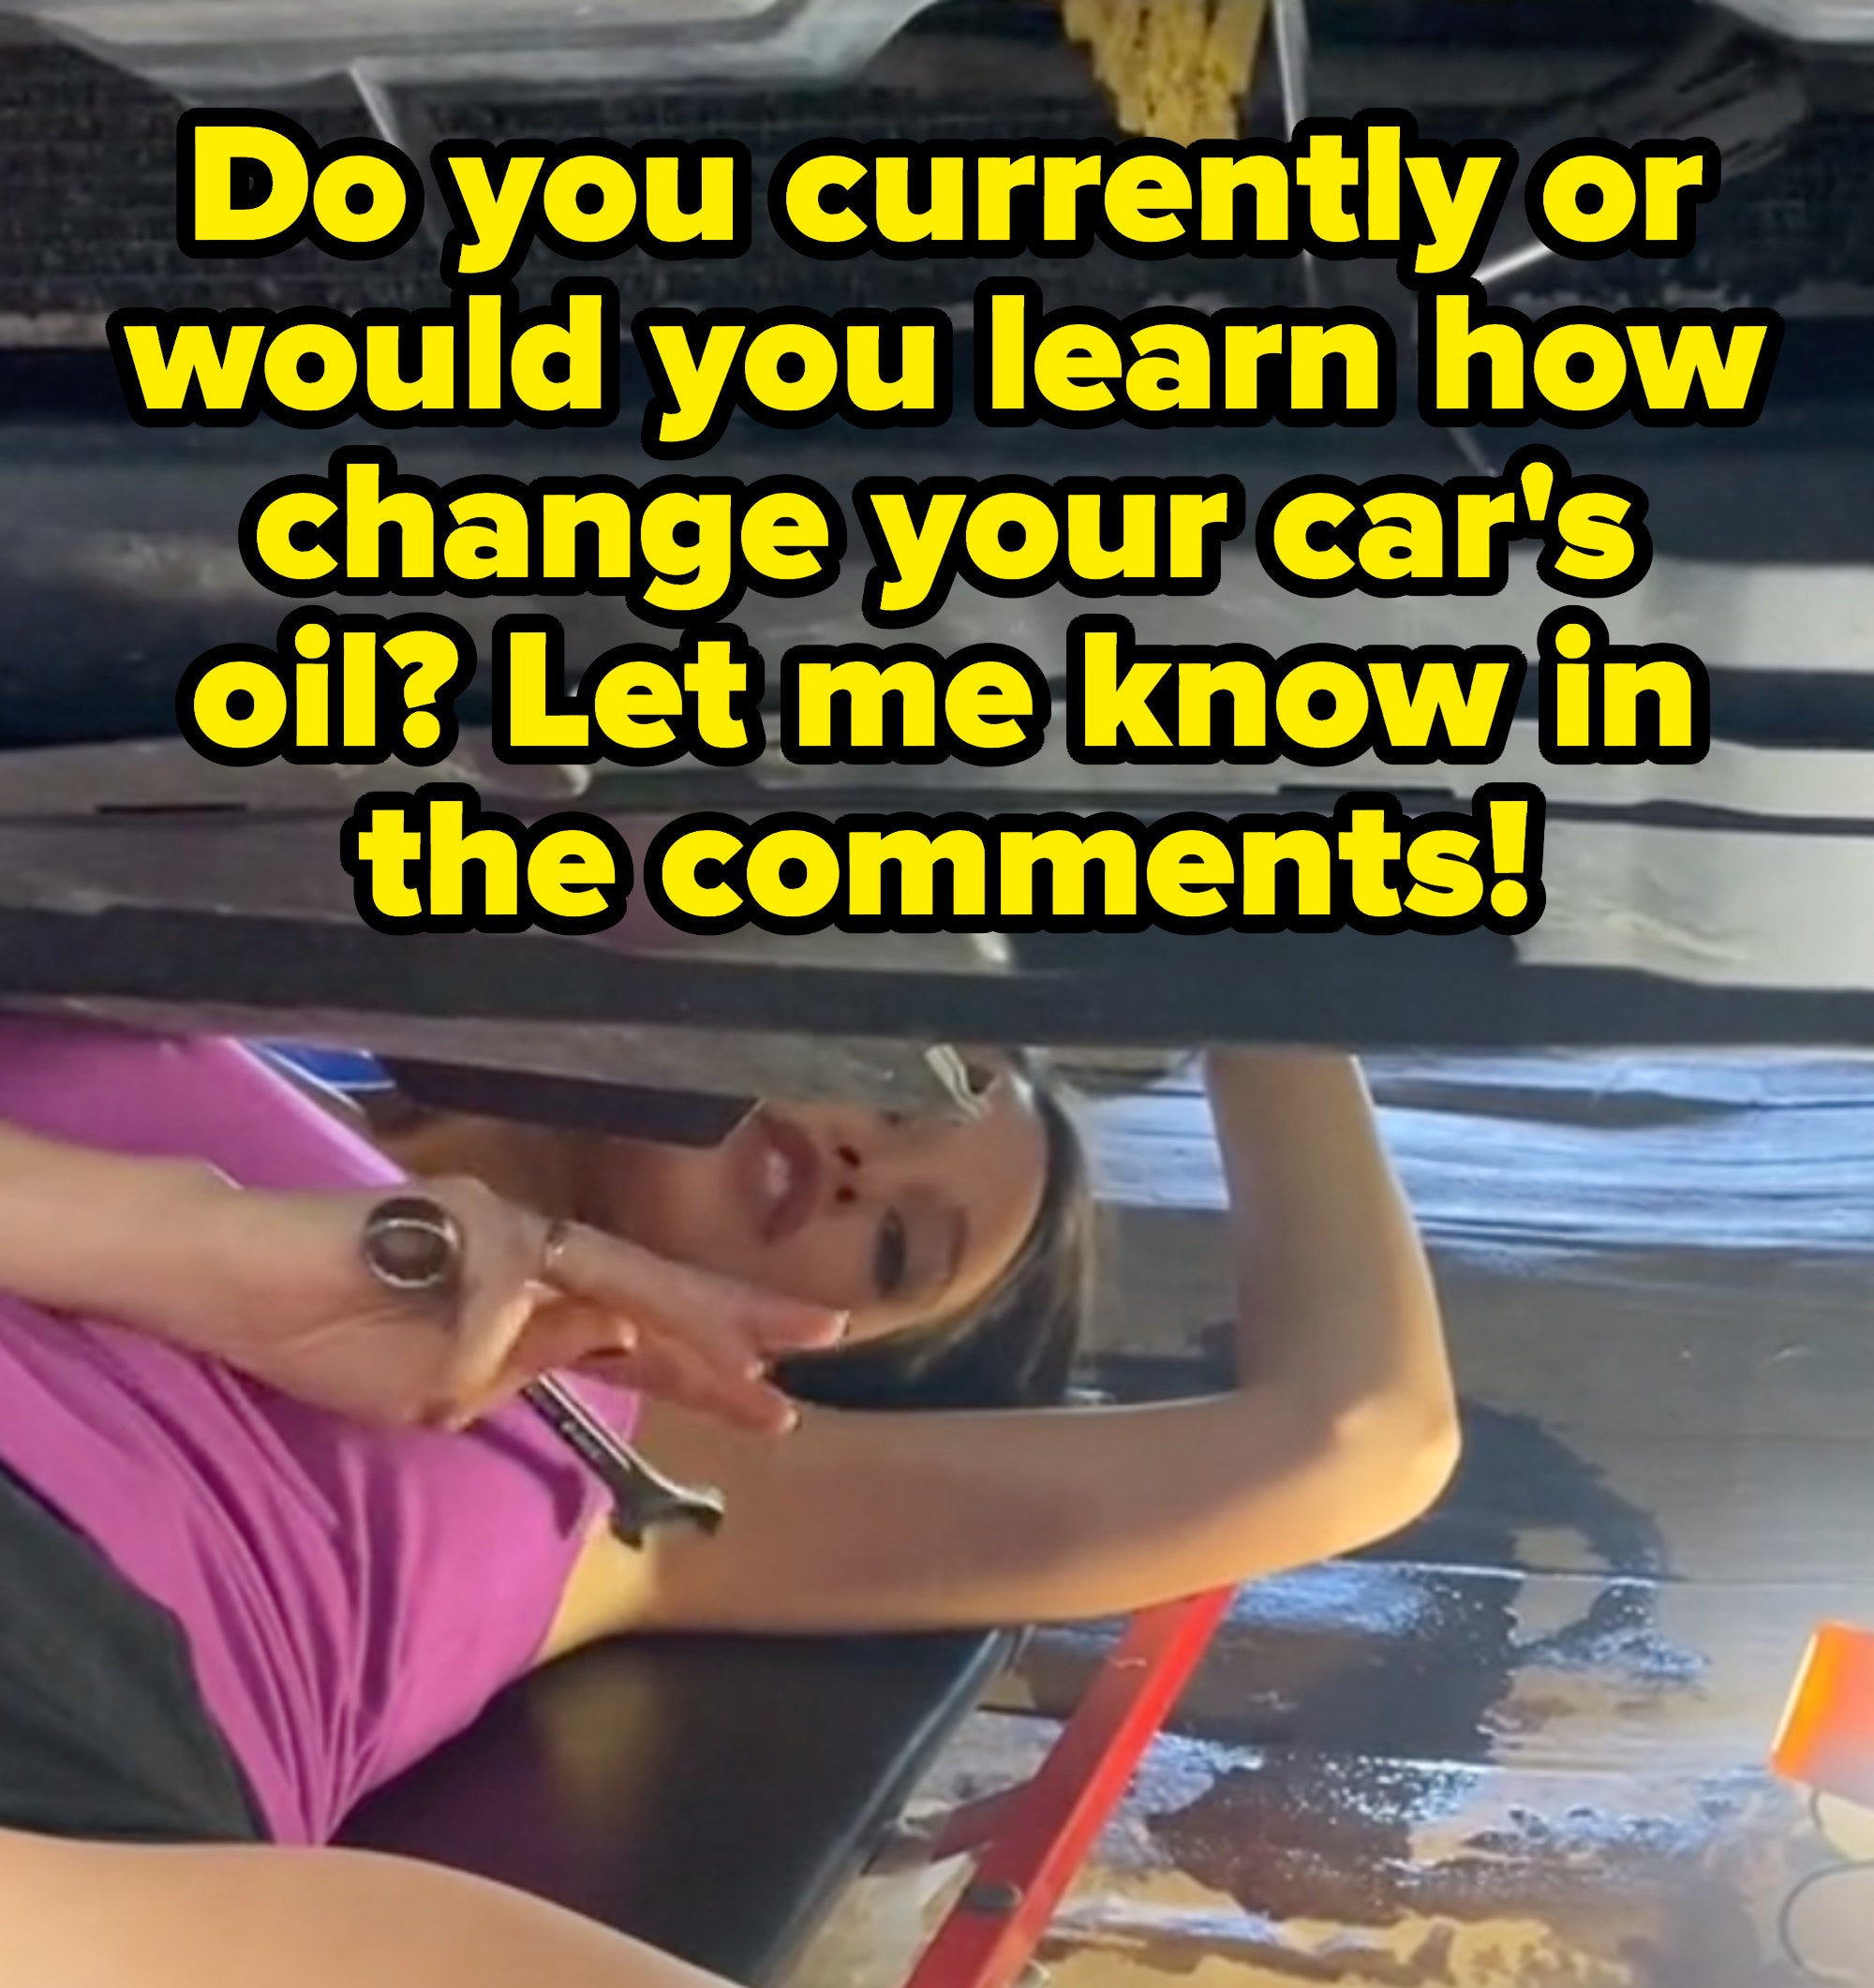 &quot;Do you currently or would you learn how to change your car&#x27;s oil? Let me know in the comments!&quot;